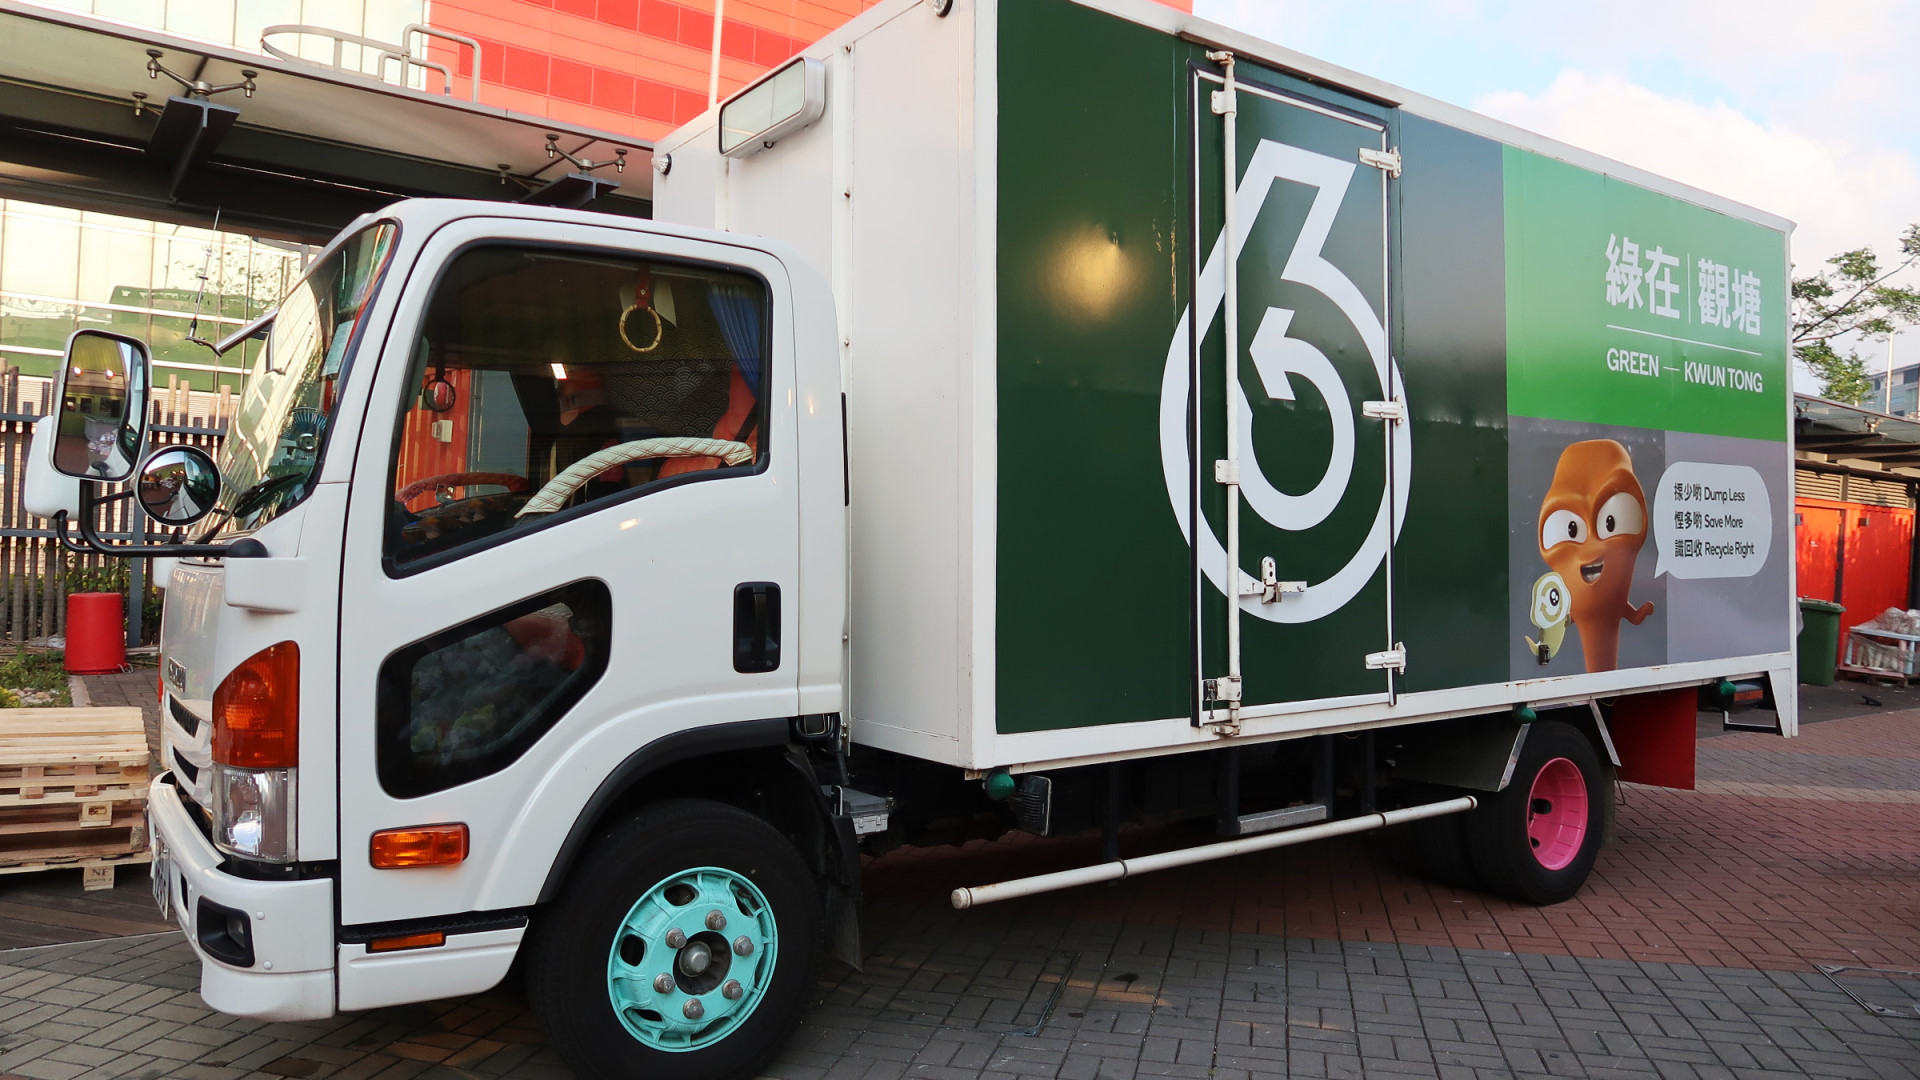 The operator of Recycling Staion collects recyclables from housing estates